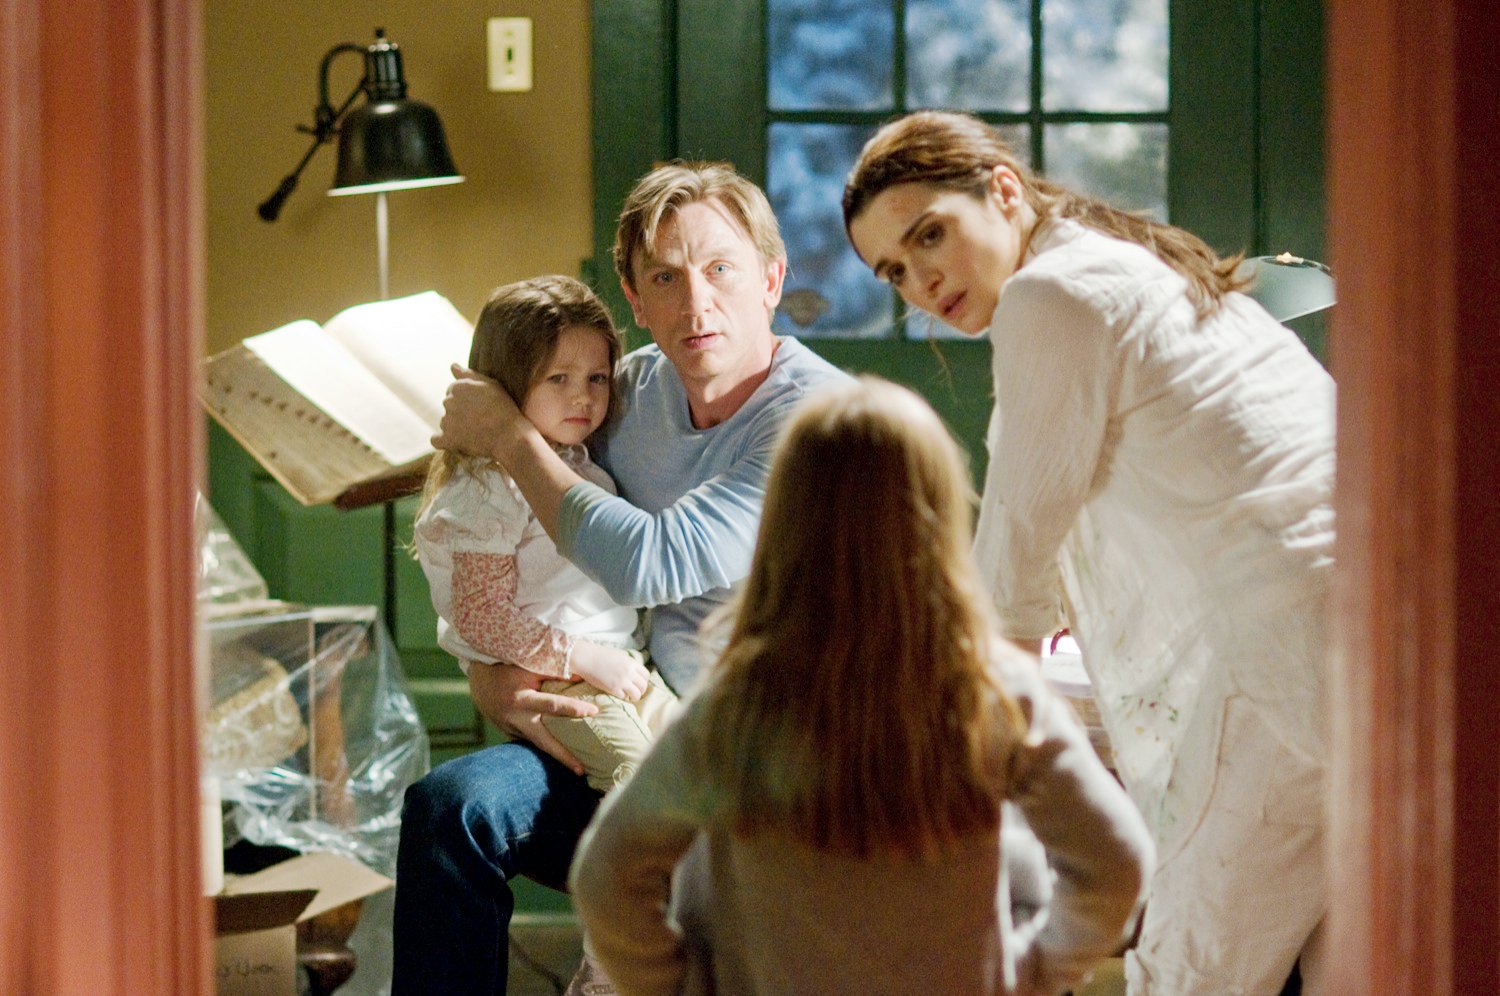 Daniel Craig stars as Will Atenton and Rachel Weisz stars as Libby Atenton in Universal Pictures' Dream House (2011)